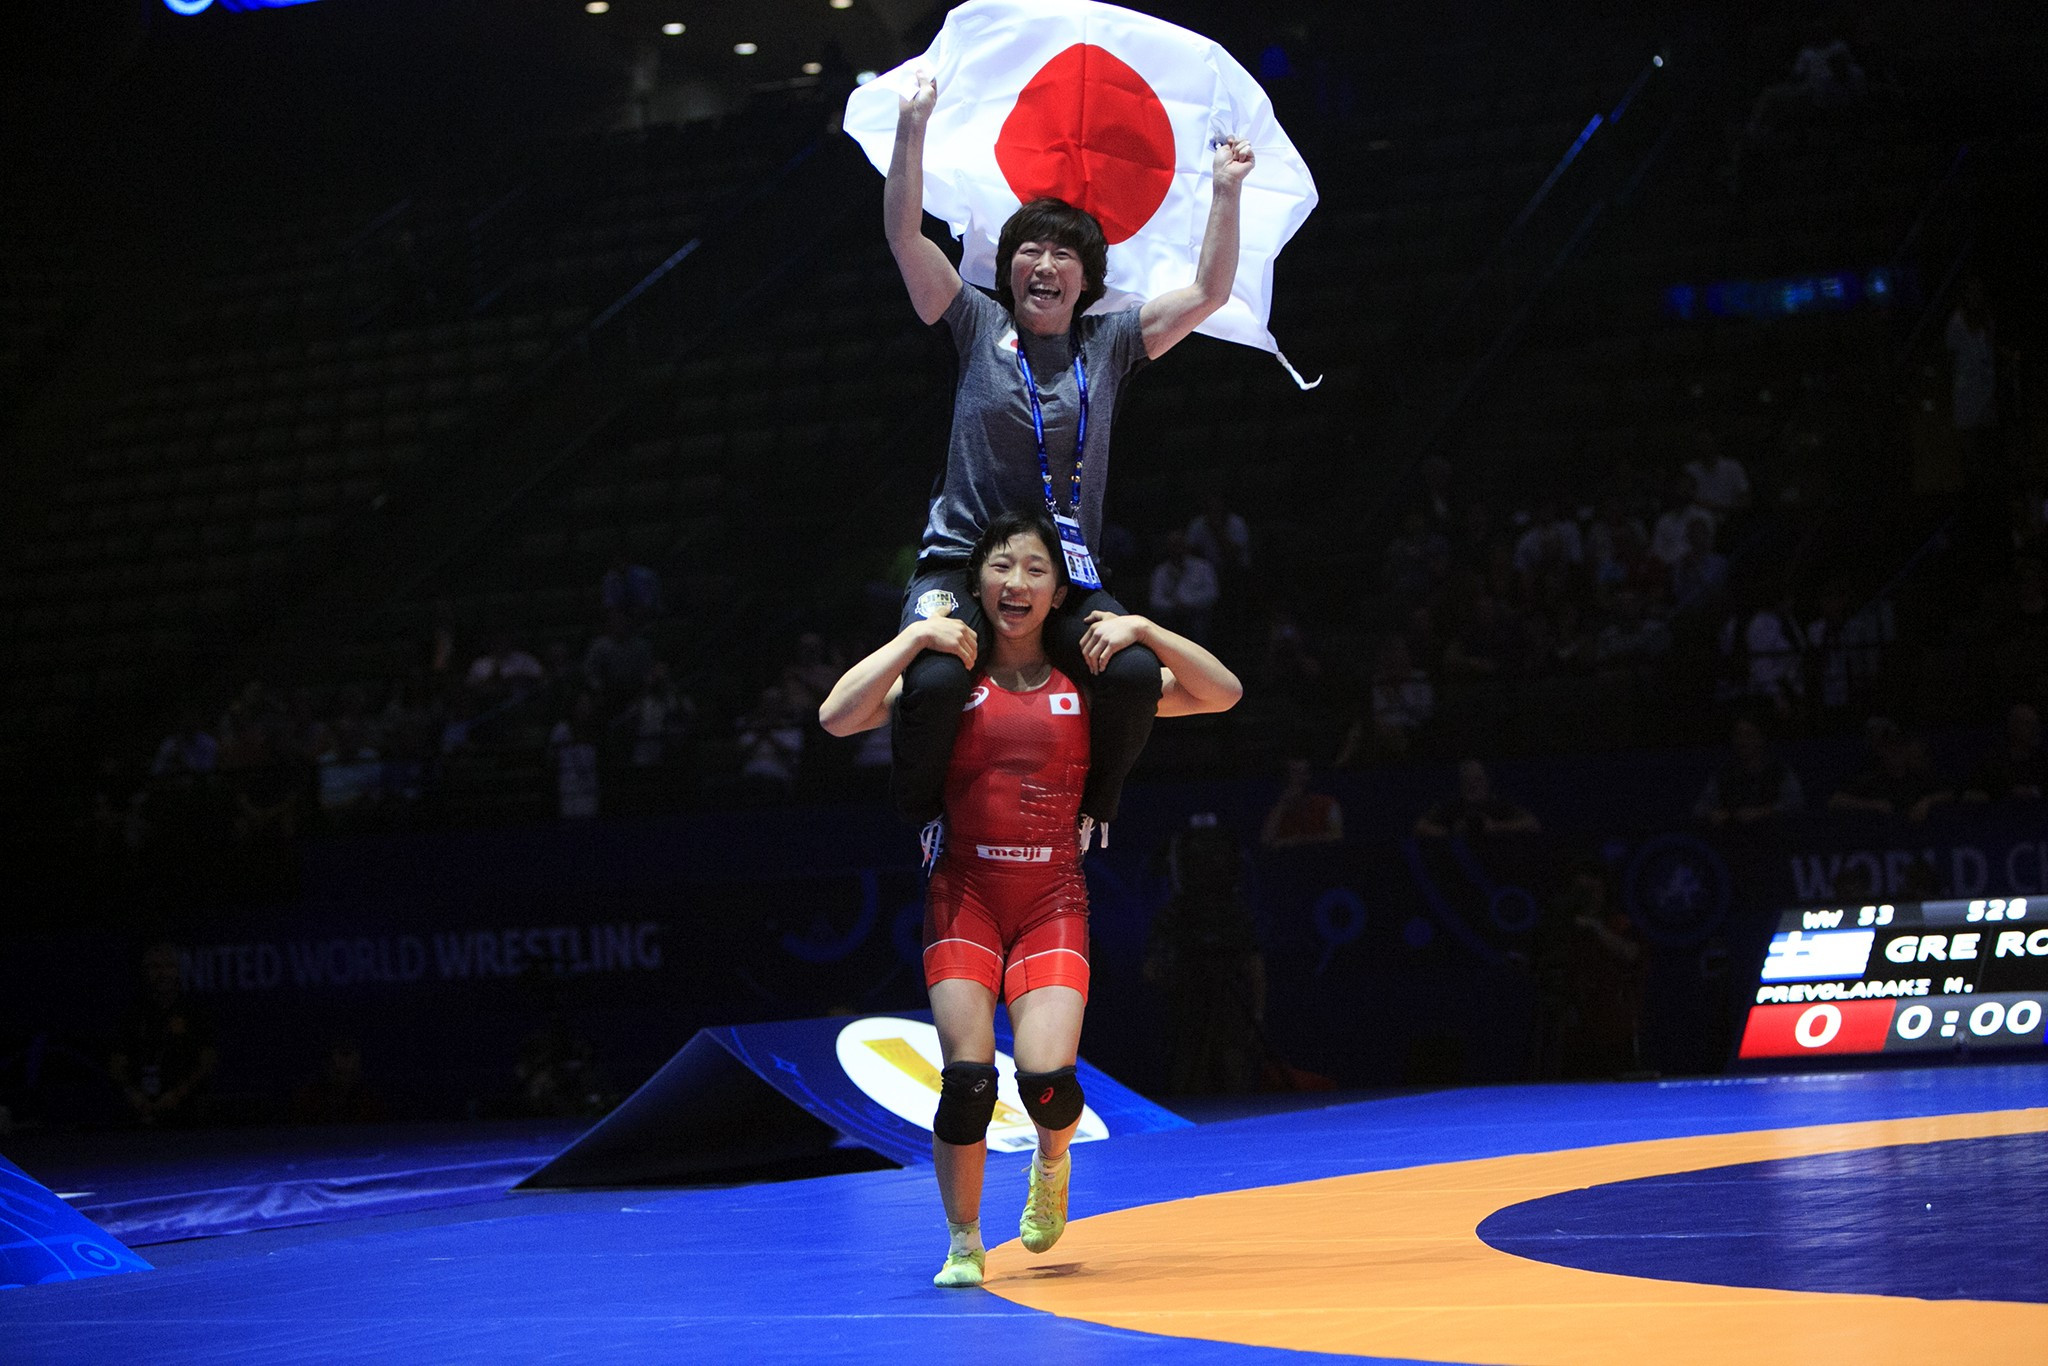 Susaki clinched her first major international title at senior level with victory over Emilia Vuc in the 48kg final ©UWW